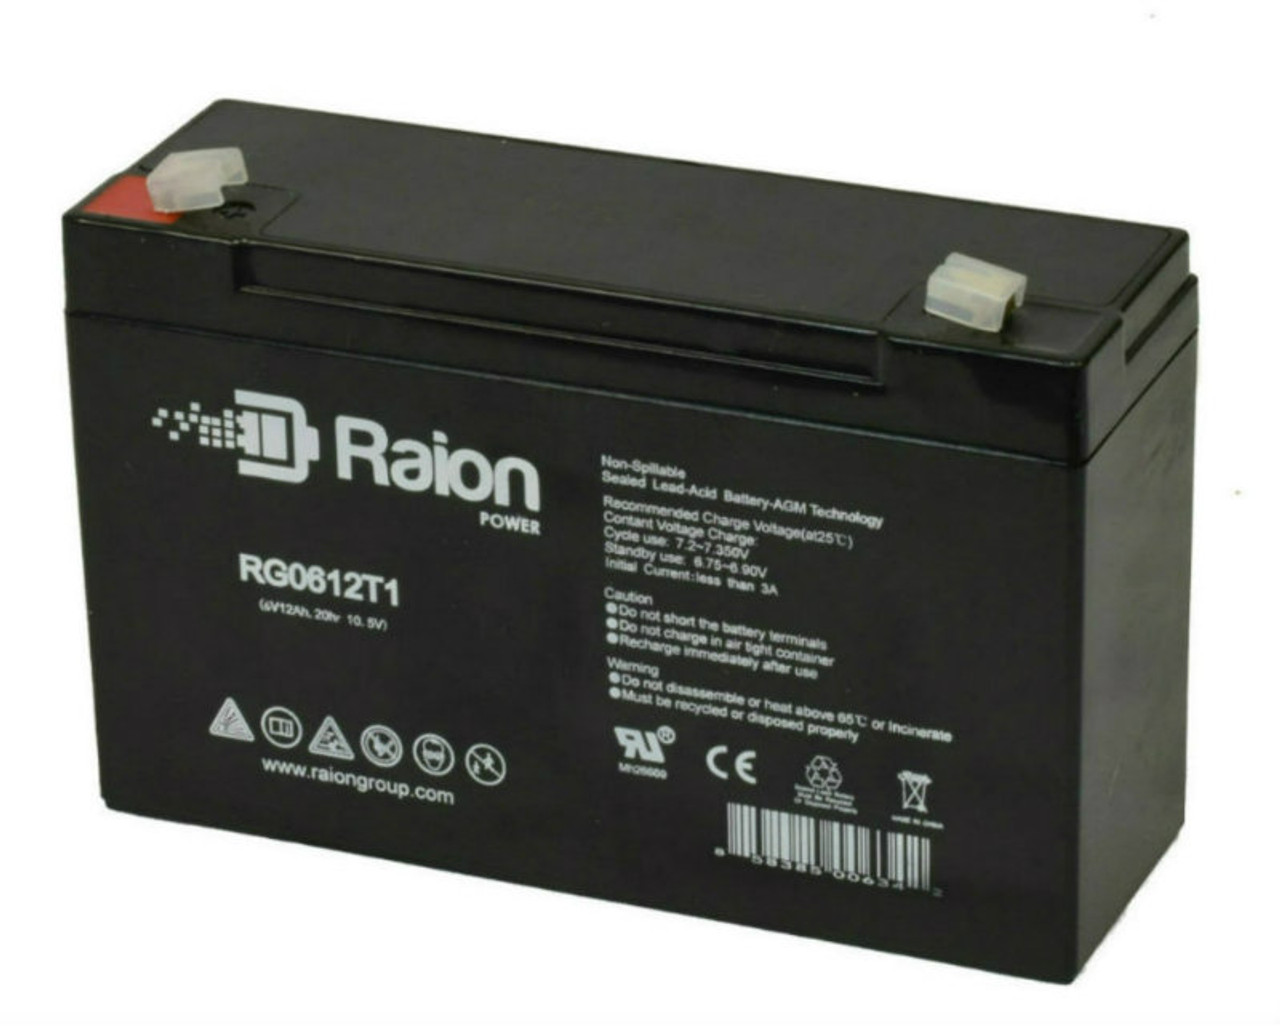 Raion Power RG06120T1 Replacement Battery for Teledyne 2CL12S7